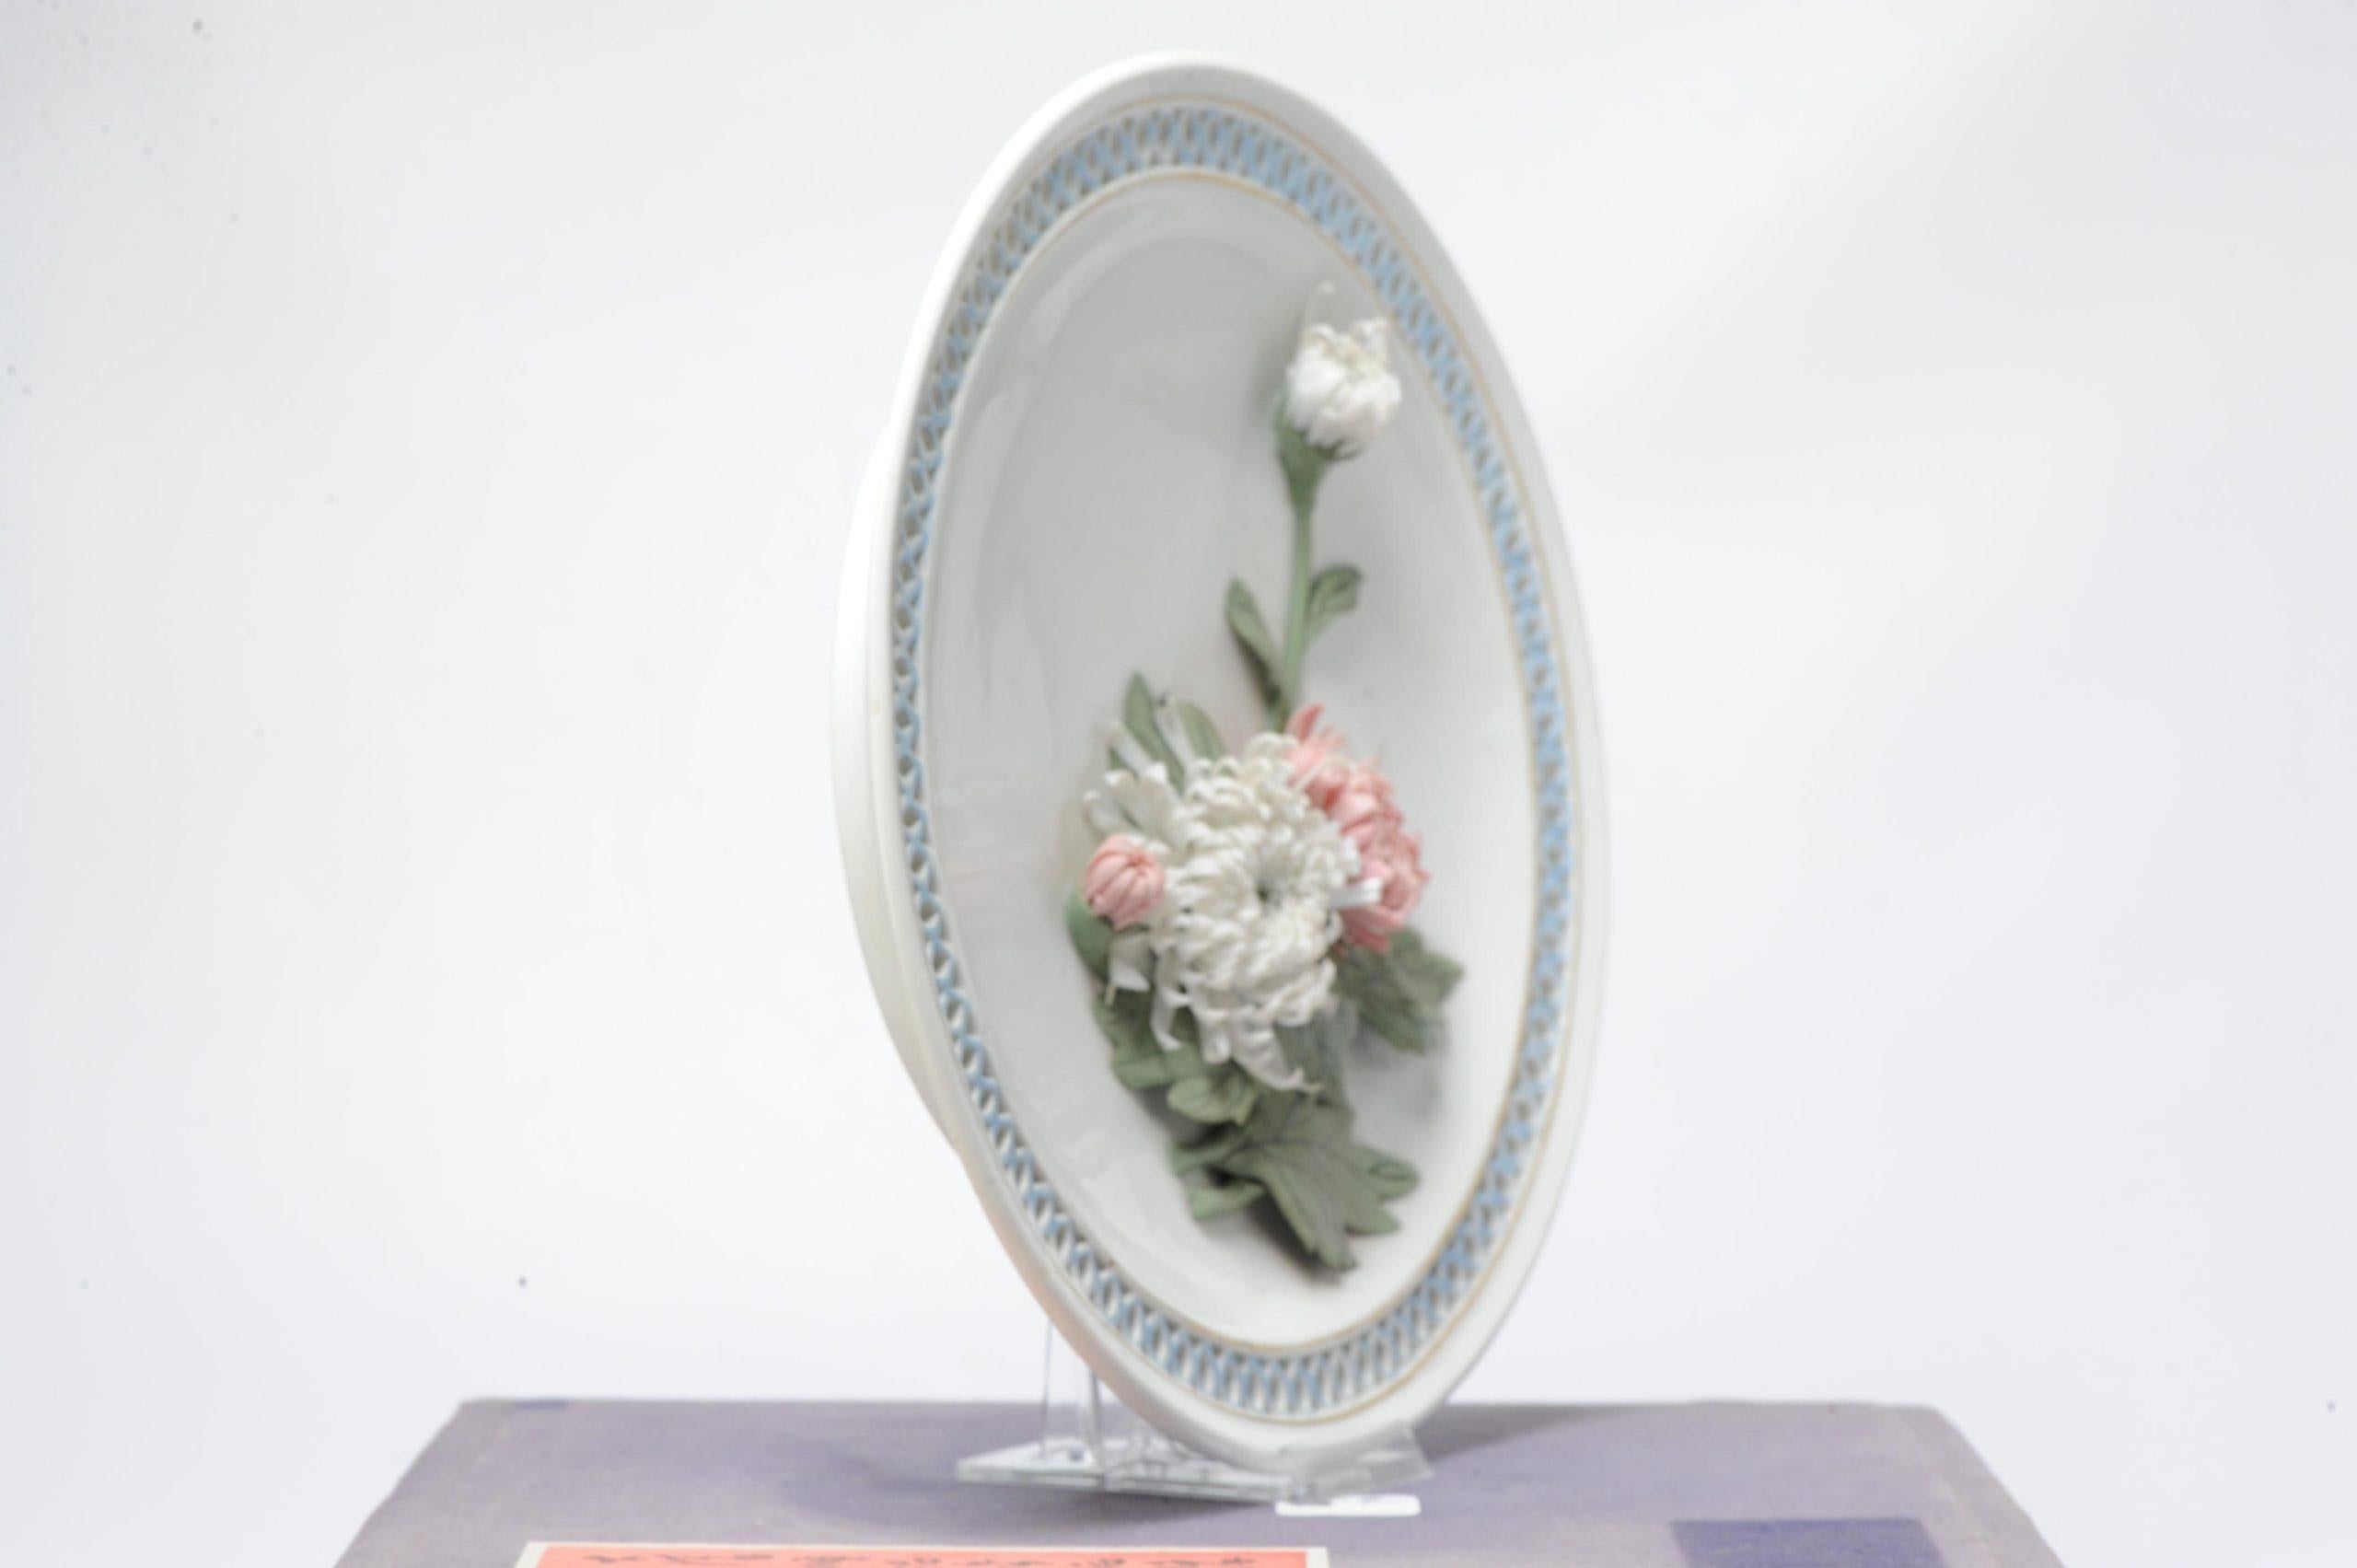 Lovely PRoC period Red ground dish with a relief scene of a flower bouquet. China 1970-1990. Unusual piece.

Additional information:
Material: Porcelain & Pottery
Region of Origin: China
Period: 20th century PRoC (1949 - now)
Condition: